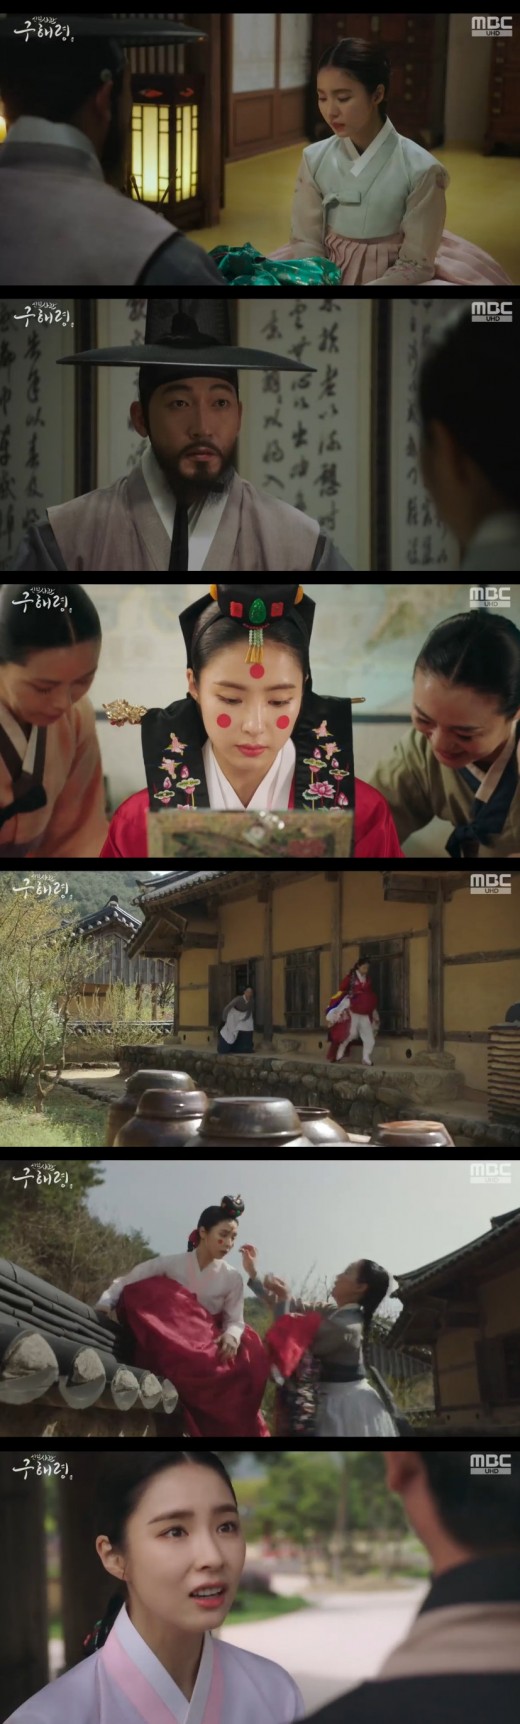 Shin Se-kyung fled to avoid forced marriageIn MBCs Rookie Historian Goo Hae-ryung broadcast on the 18th, Rookie Historian Goo Hae-ryung was portrayed as a screen staring at the farewell poem.While the battle between the two Koreas is in full swing, Cho Dae-jin (Kim Yeo-jin) asked Lee Jin (Park Ki-woong) for his choice.I dont want to be a tax collector who is swung by his deputies and I dont want to be a bad brother who cant keep his brother, he said.Theres a grave in the handshake, too, he advised. Think more about it.Lee Jin sought out his brother Lee Lim (Cha Eun-woo) and soothed him. Lee Lim was in the middle of this battle because he was a plum.Irim said, You have soothed me enough. You can now be a busy taxpayer who cant even see the sky.You must have heard what I did.But Im sad, I think so. I read your novel. Im so sorry I didnt read it before it was a gold medal.I want you to answer this one honestly, Kim Do-ryeong, you wrote it for me, right? A handsome appearance, a gentle temper, especially a facial description, Lee said.I wrote it in the mirror.At the meeting, Lee Jin declared that she would give women the opportunity to take the past exam.I would be willing to have a woman if I had such a talent. Meanwhile, Rookie Historian Goo Hae-ryung is under pressure to pay for being in a state of confusion.Rookie Historian Goo Hae-ryung presented Koo Jae-kyung with a scroll and said, I liked my brother in that clothes when I was a child.I think Ill hate him less if I think of him.On the day of the wedding, Rookie Historian Goo Hae-ryung looked sad even in a beautiful wedding dress.But before Rookie Historian Goo Hae-ryung, her husband Lee Seung-hwan declared, I am sorry, I can not marry this marriage.Rookie Historian Goo Hae-ryung also escaped from the eyes of the guests and challenged the city of Mrs.